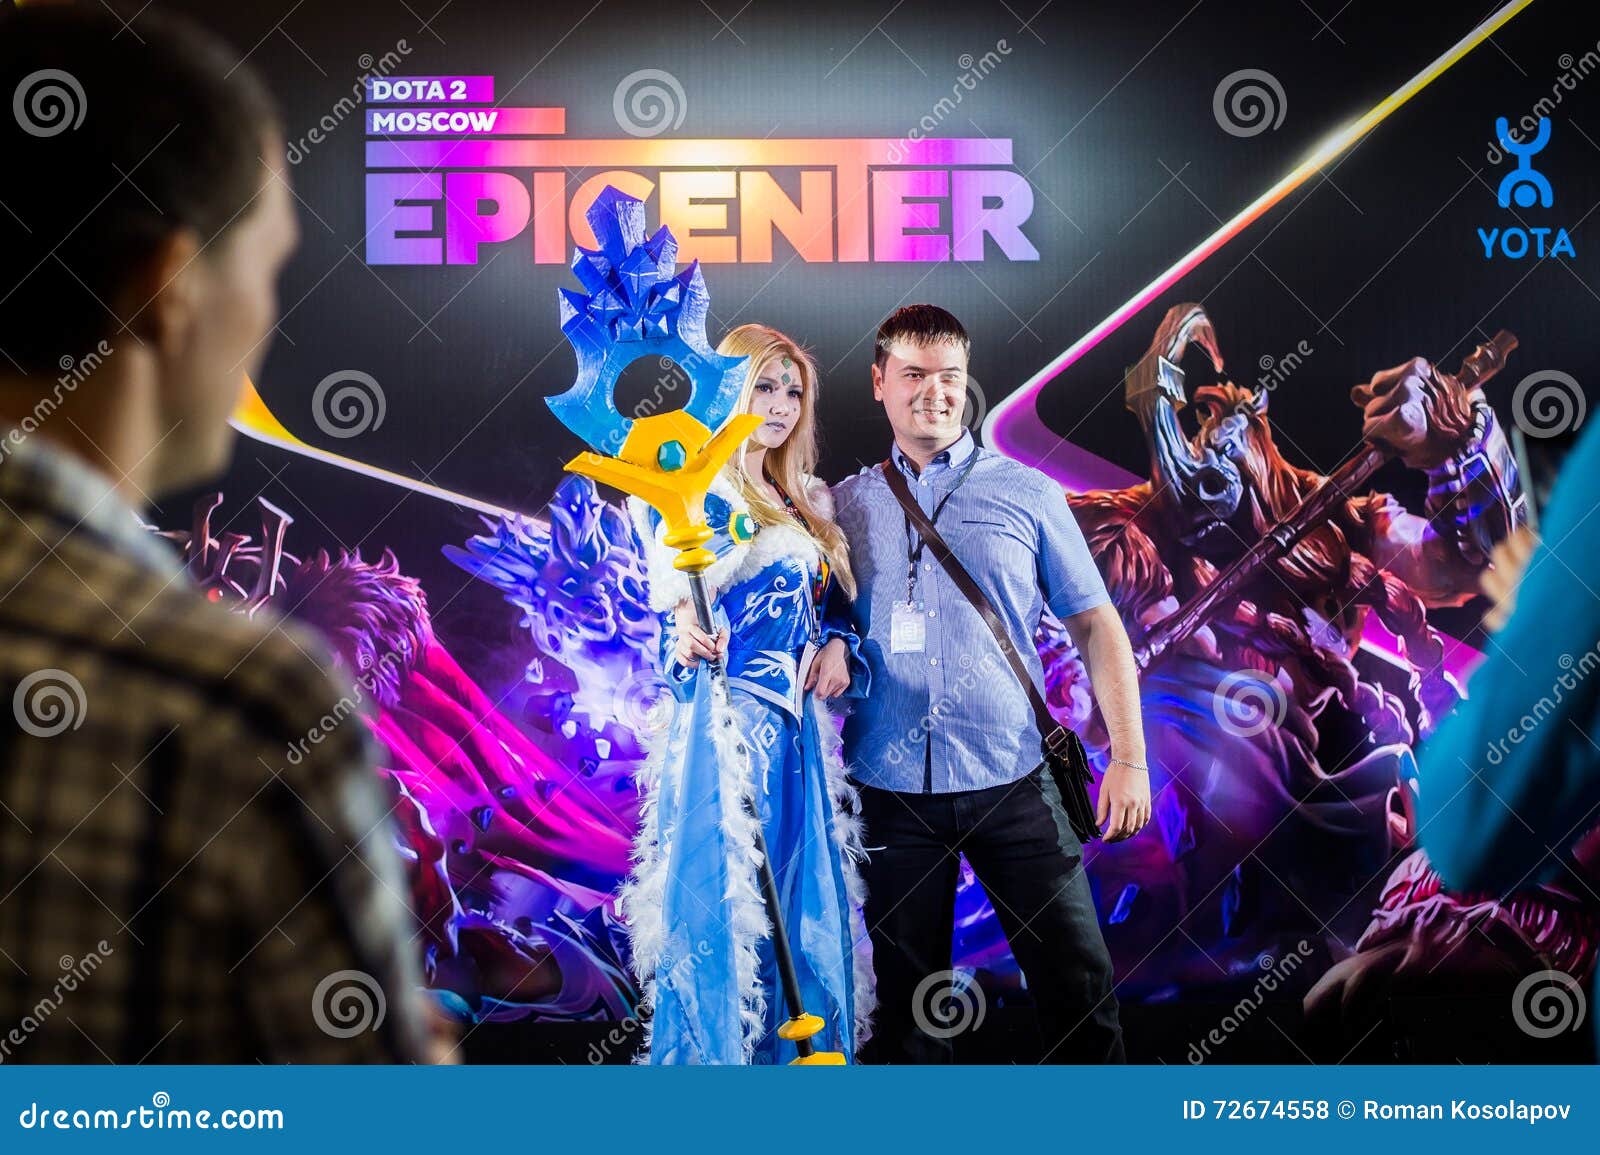 Epicenter Moscow Dota 2 Cybersport Event May 13 Cosplay Of Game